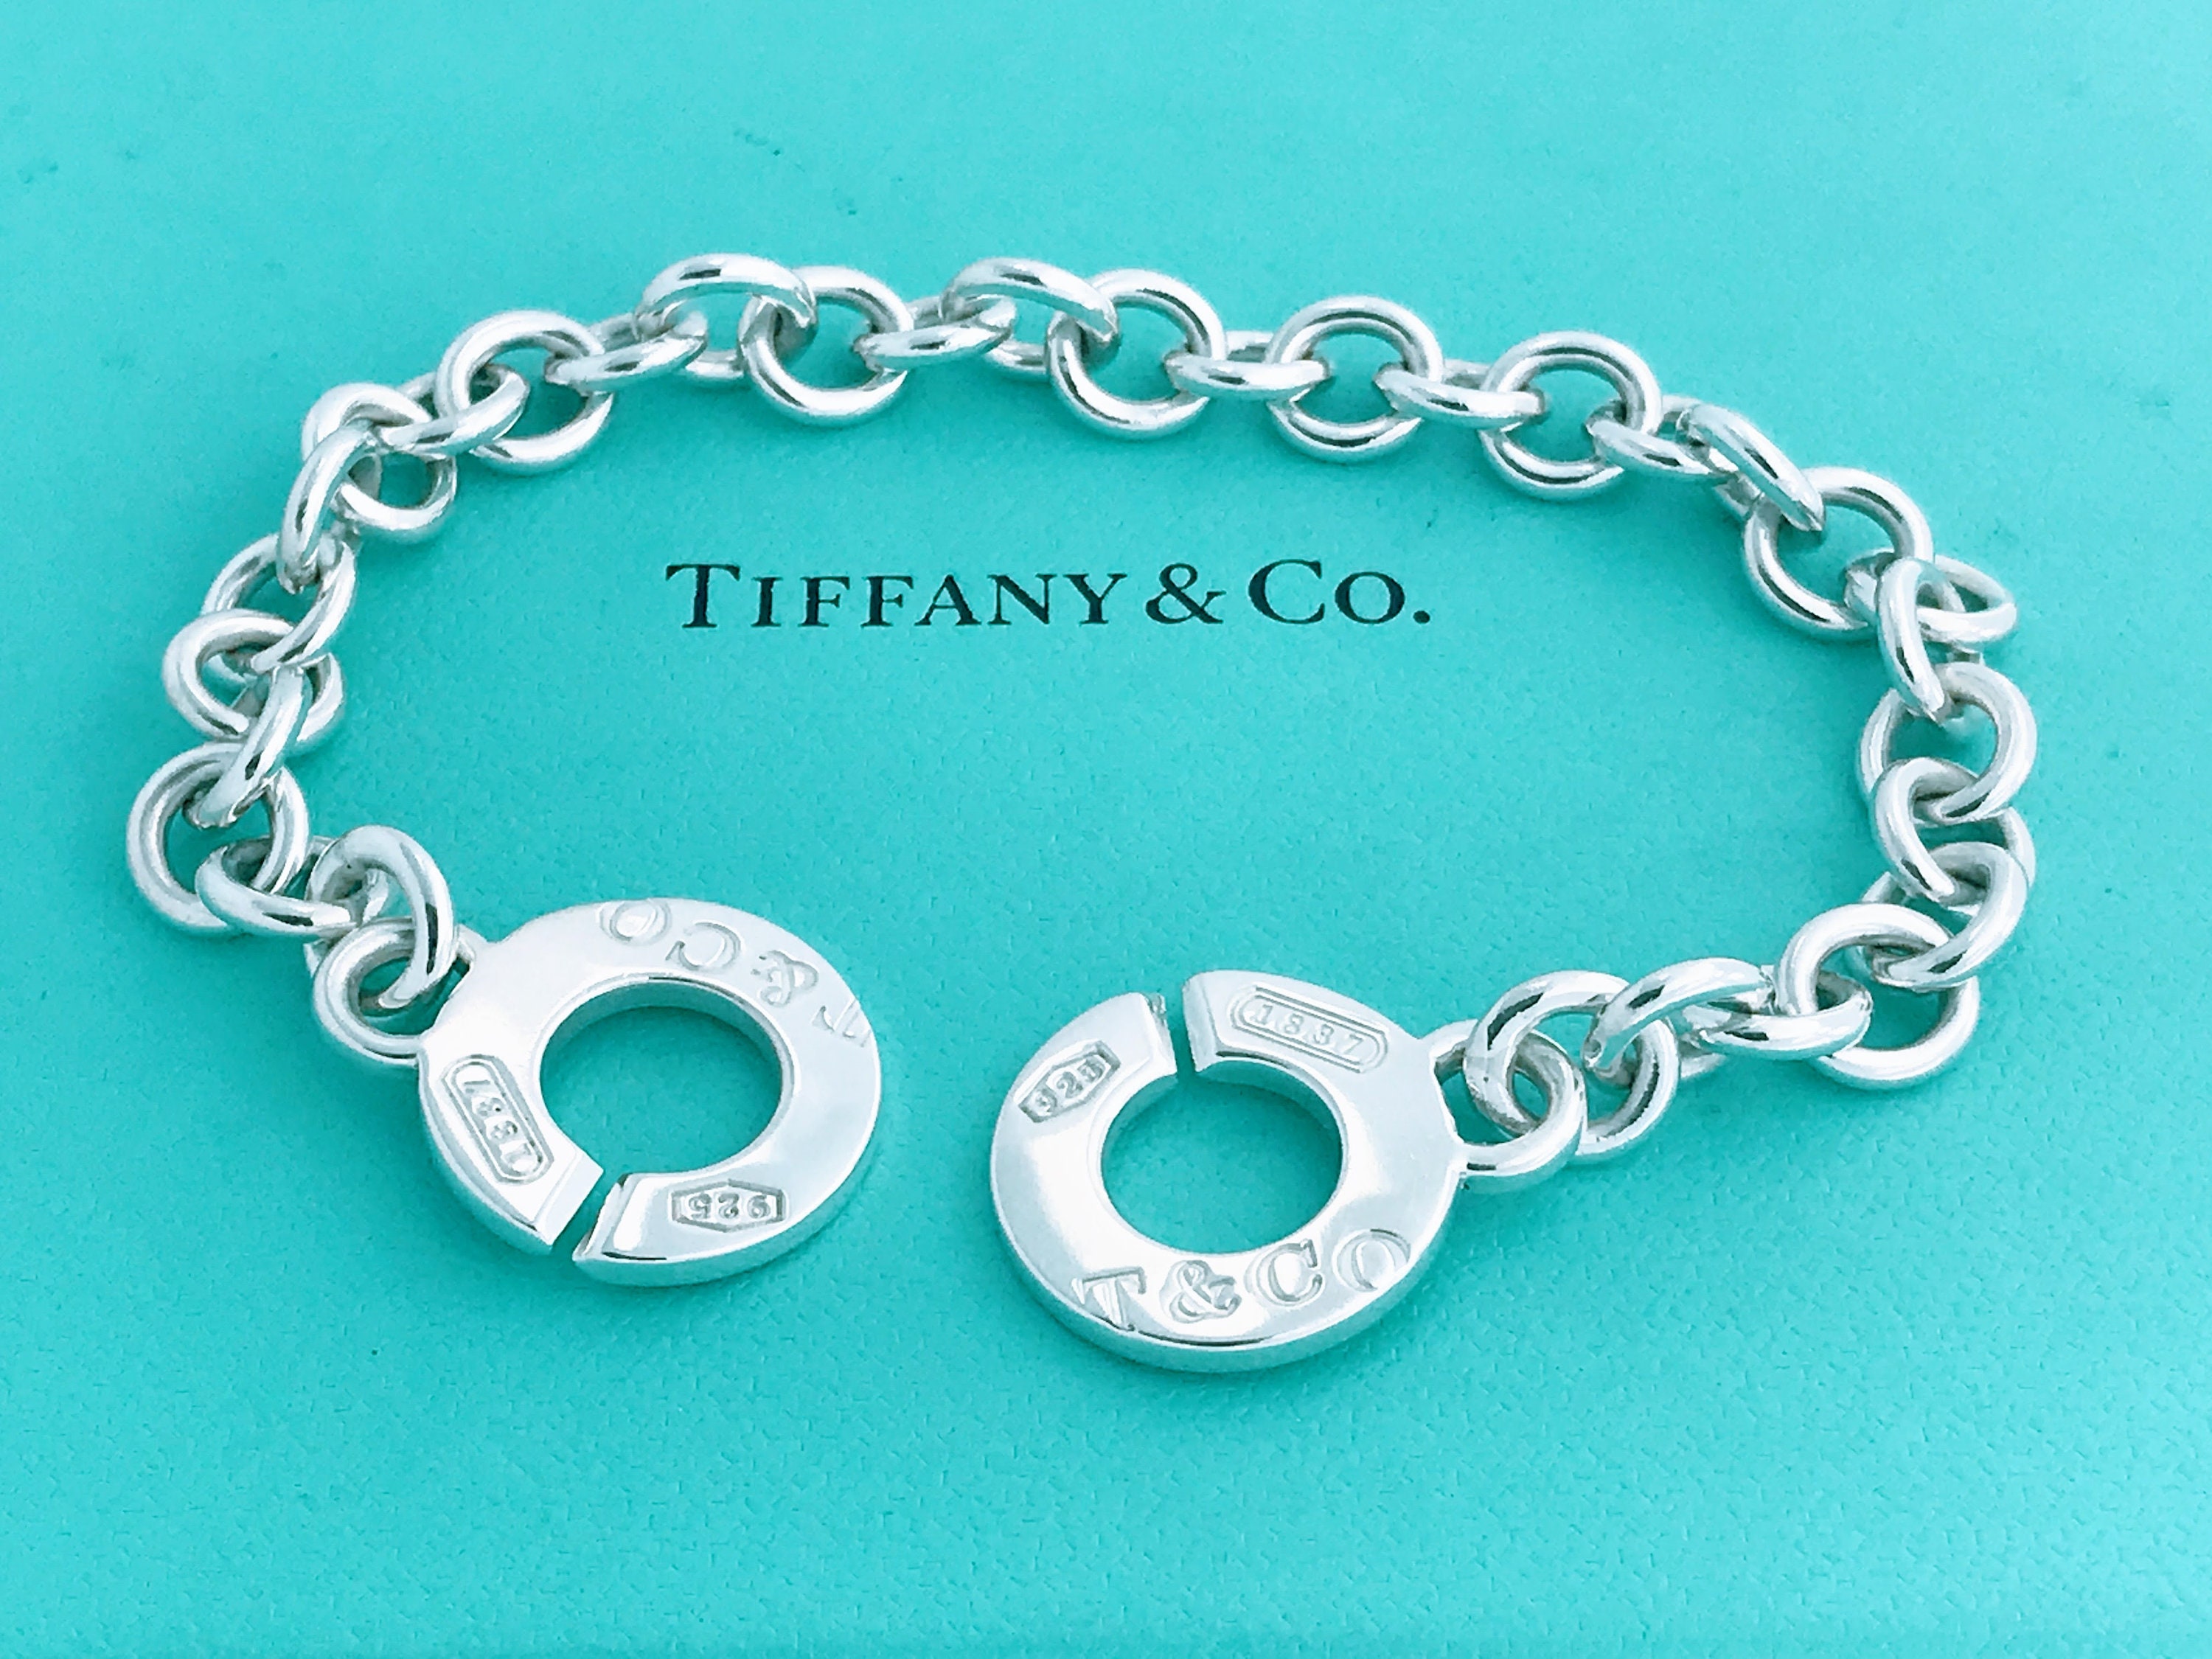 Tiffany & Co 1837 Interlocking Circles Sterling Silver Bracelet, Authentic Tiffany  Co 925 Silver Double Circle Clasp Toggle Bracelet Bangle -  Norway